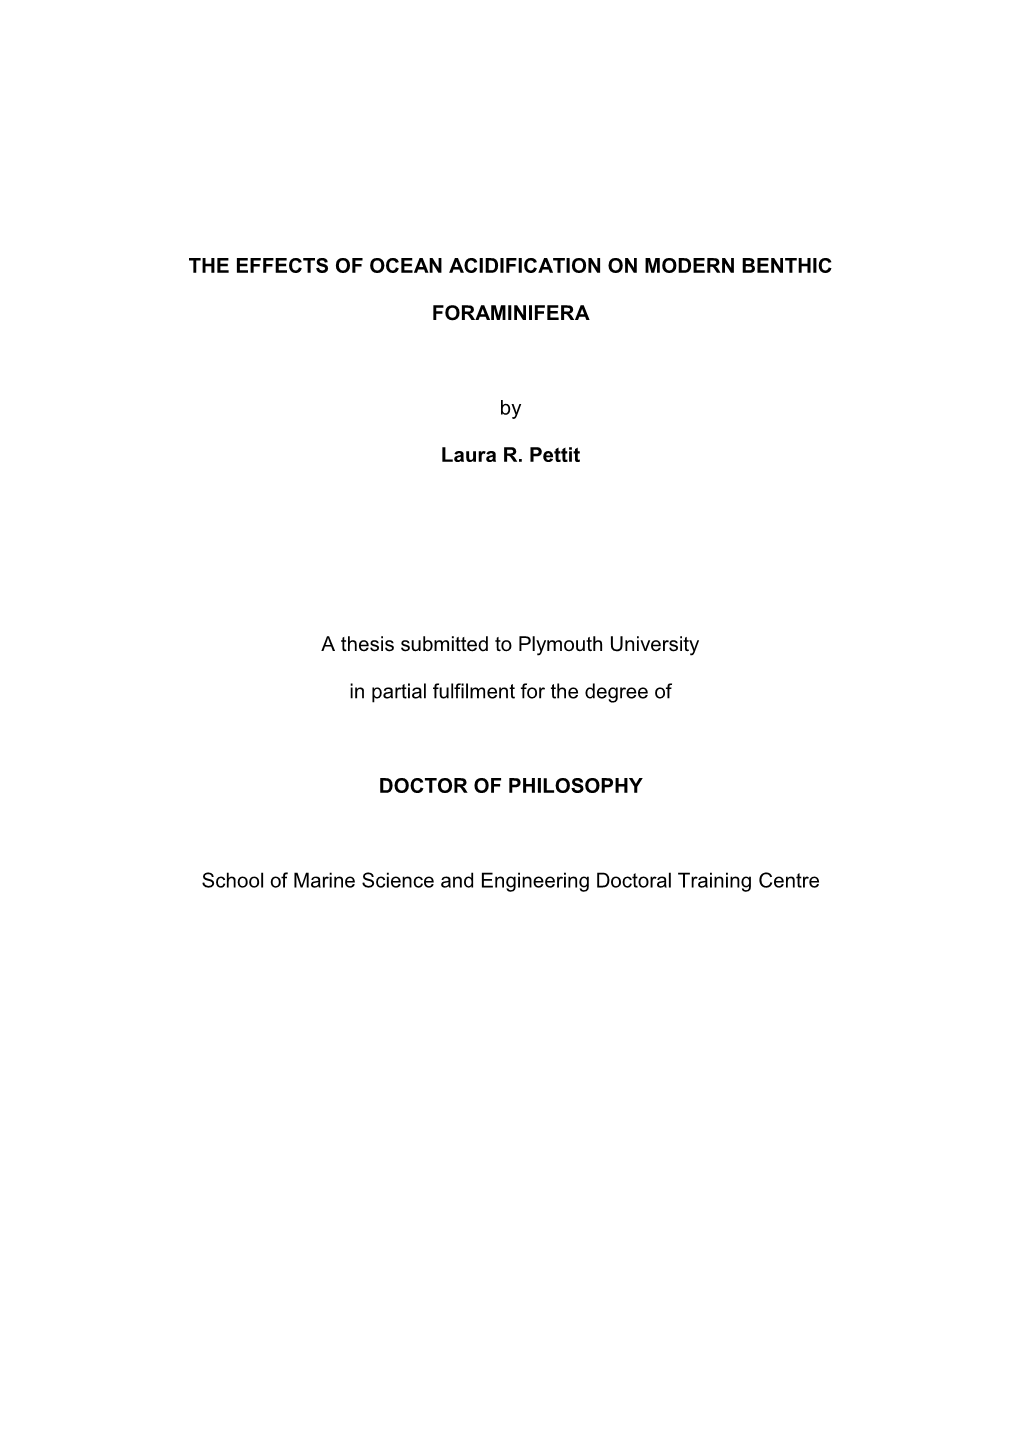 THE EFFECTS of OCEAN ACIDIFICATION on MODERN BENTHIC FORAMINIFERA by Laura R. Pettit a Thesis Submitted to Plymouth University I